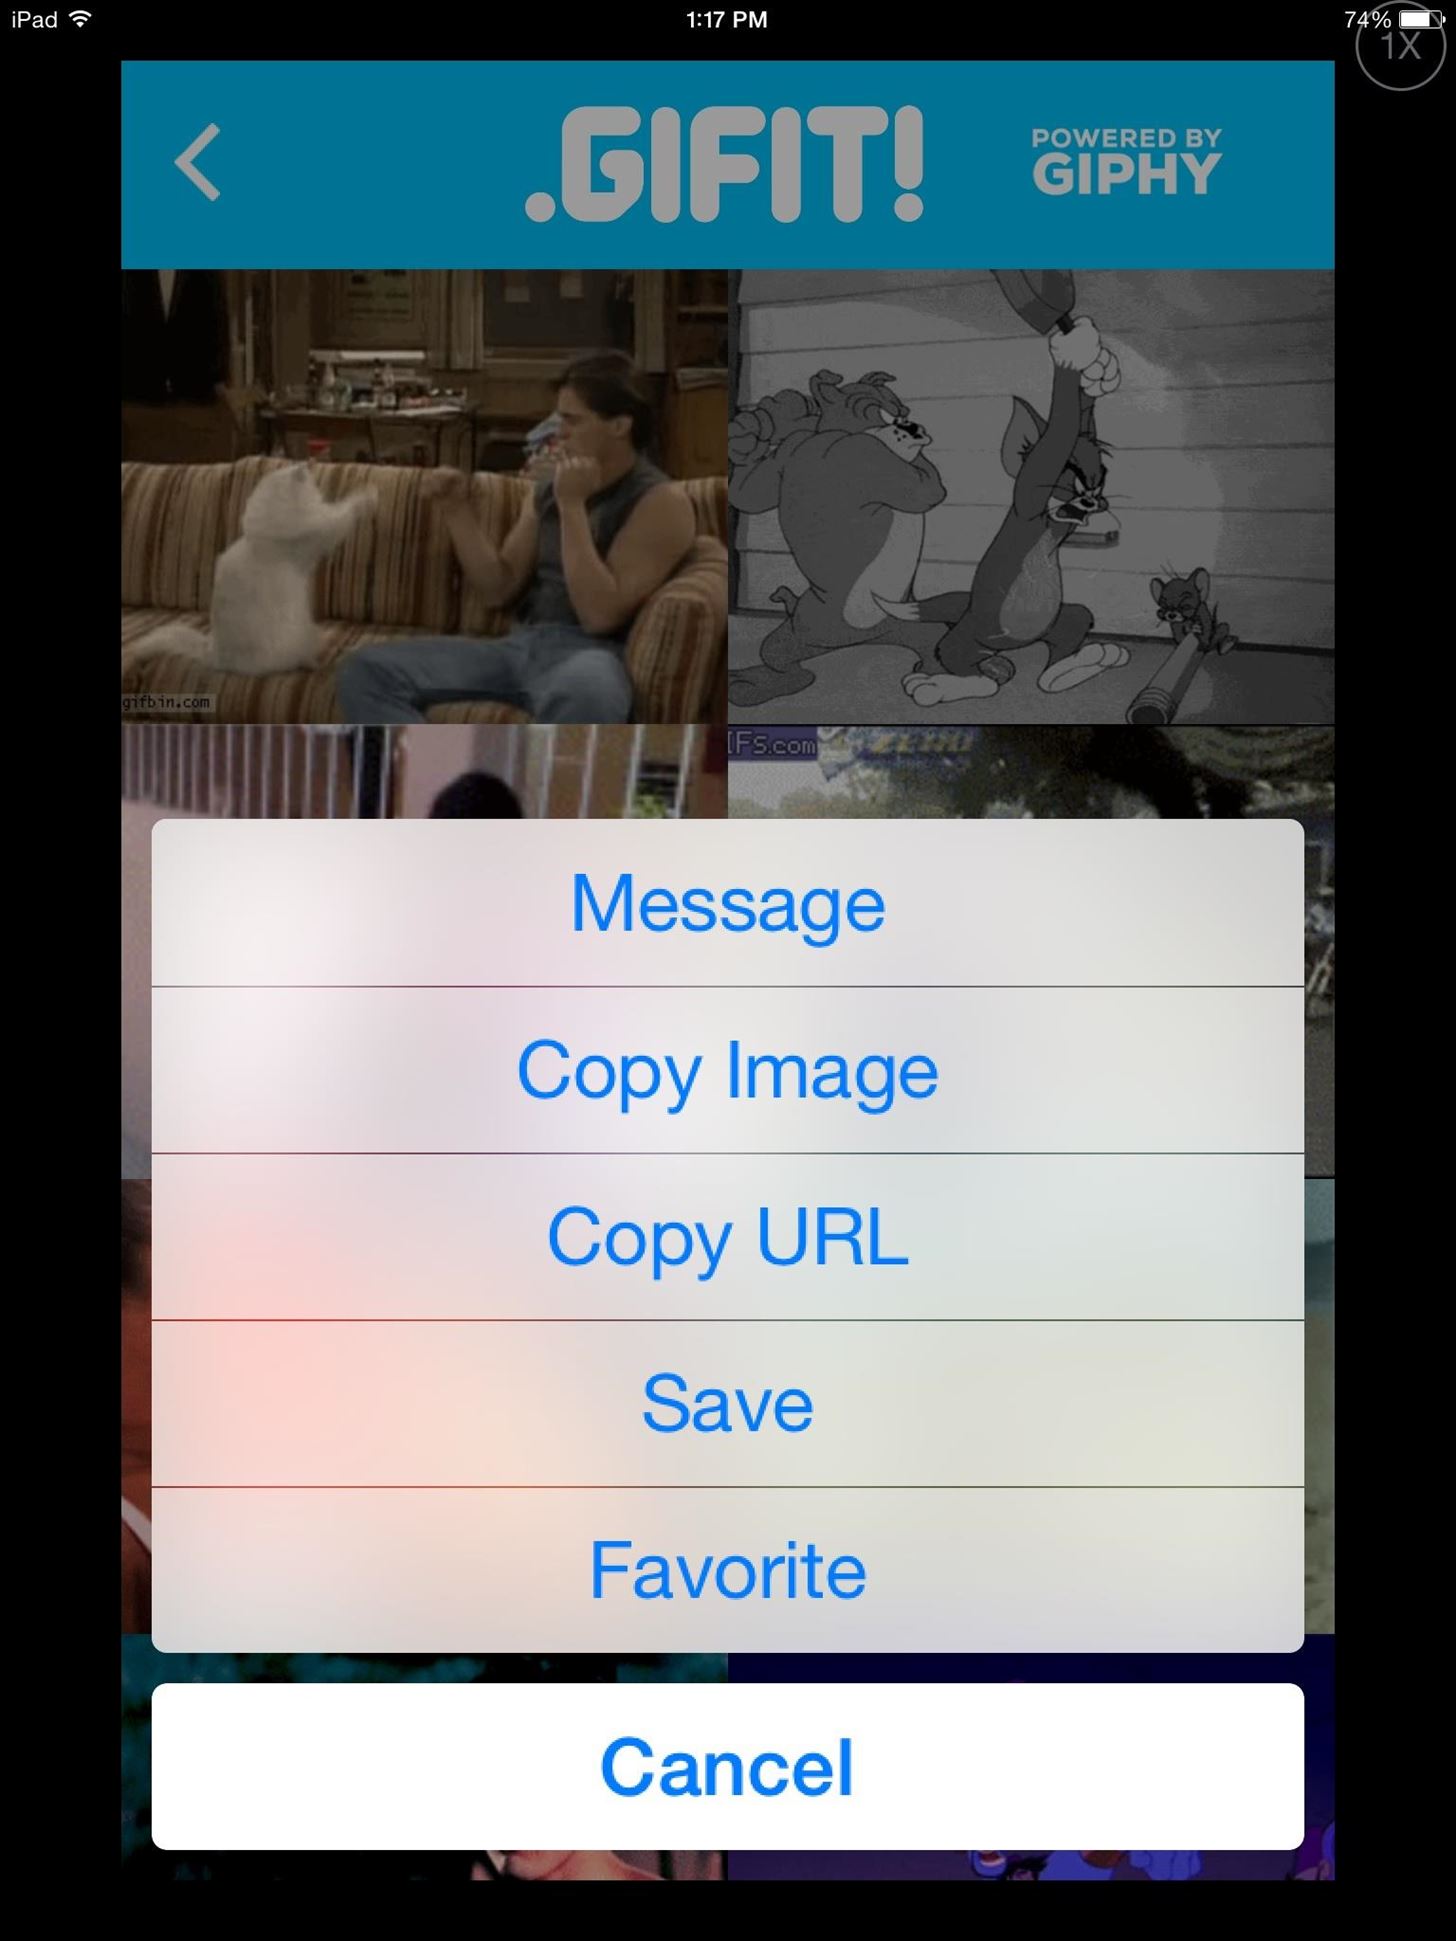 The Fastest, Easiest Way to Find & Share GIFs on Your iPad or iPhone